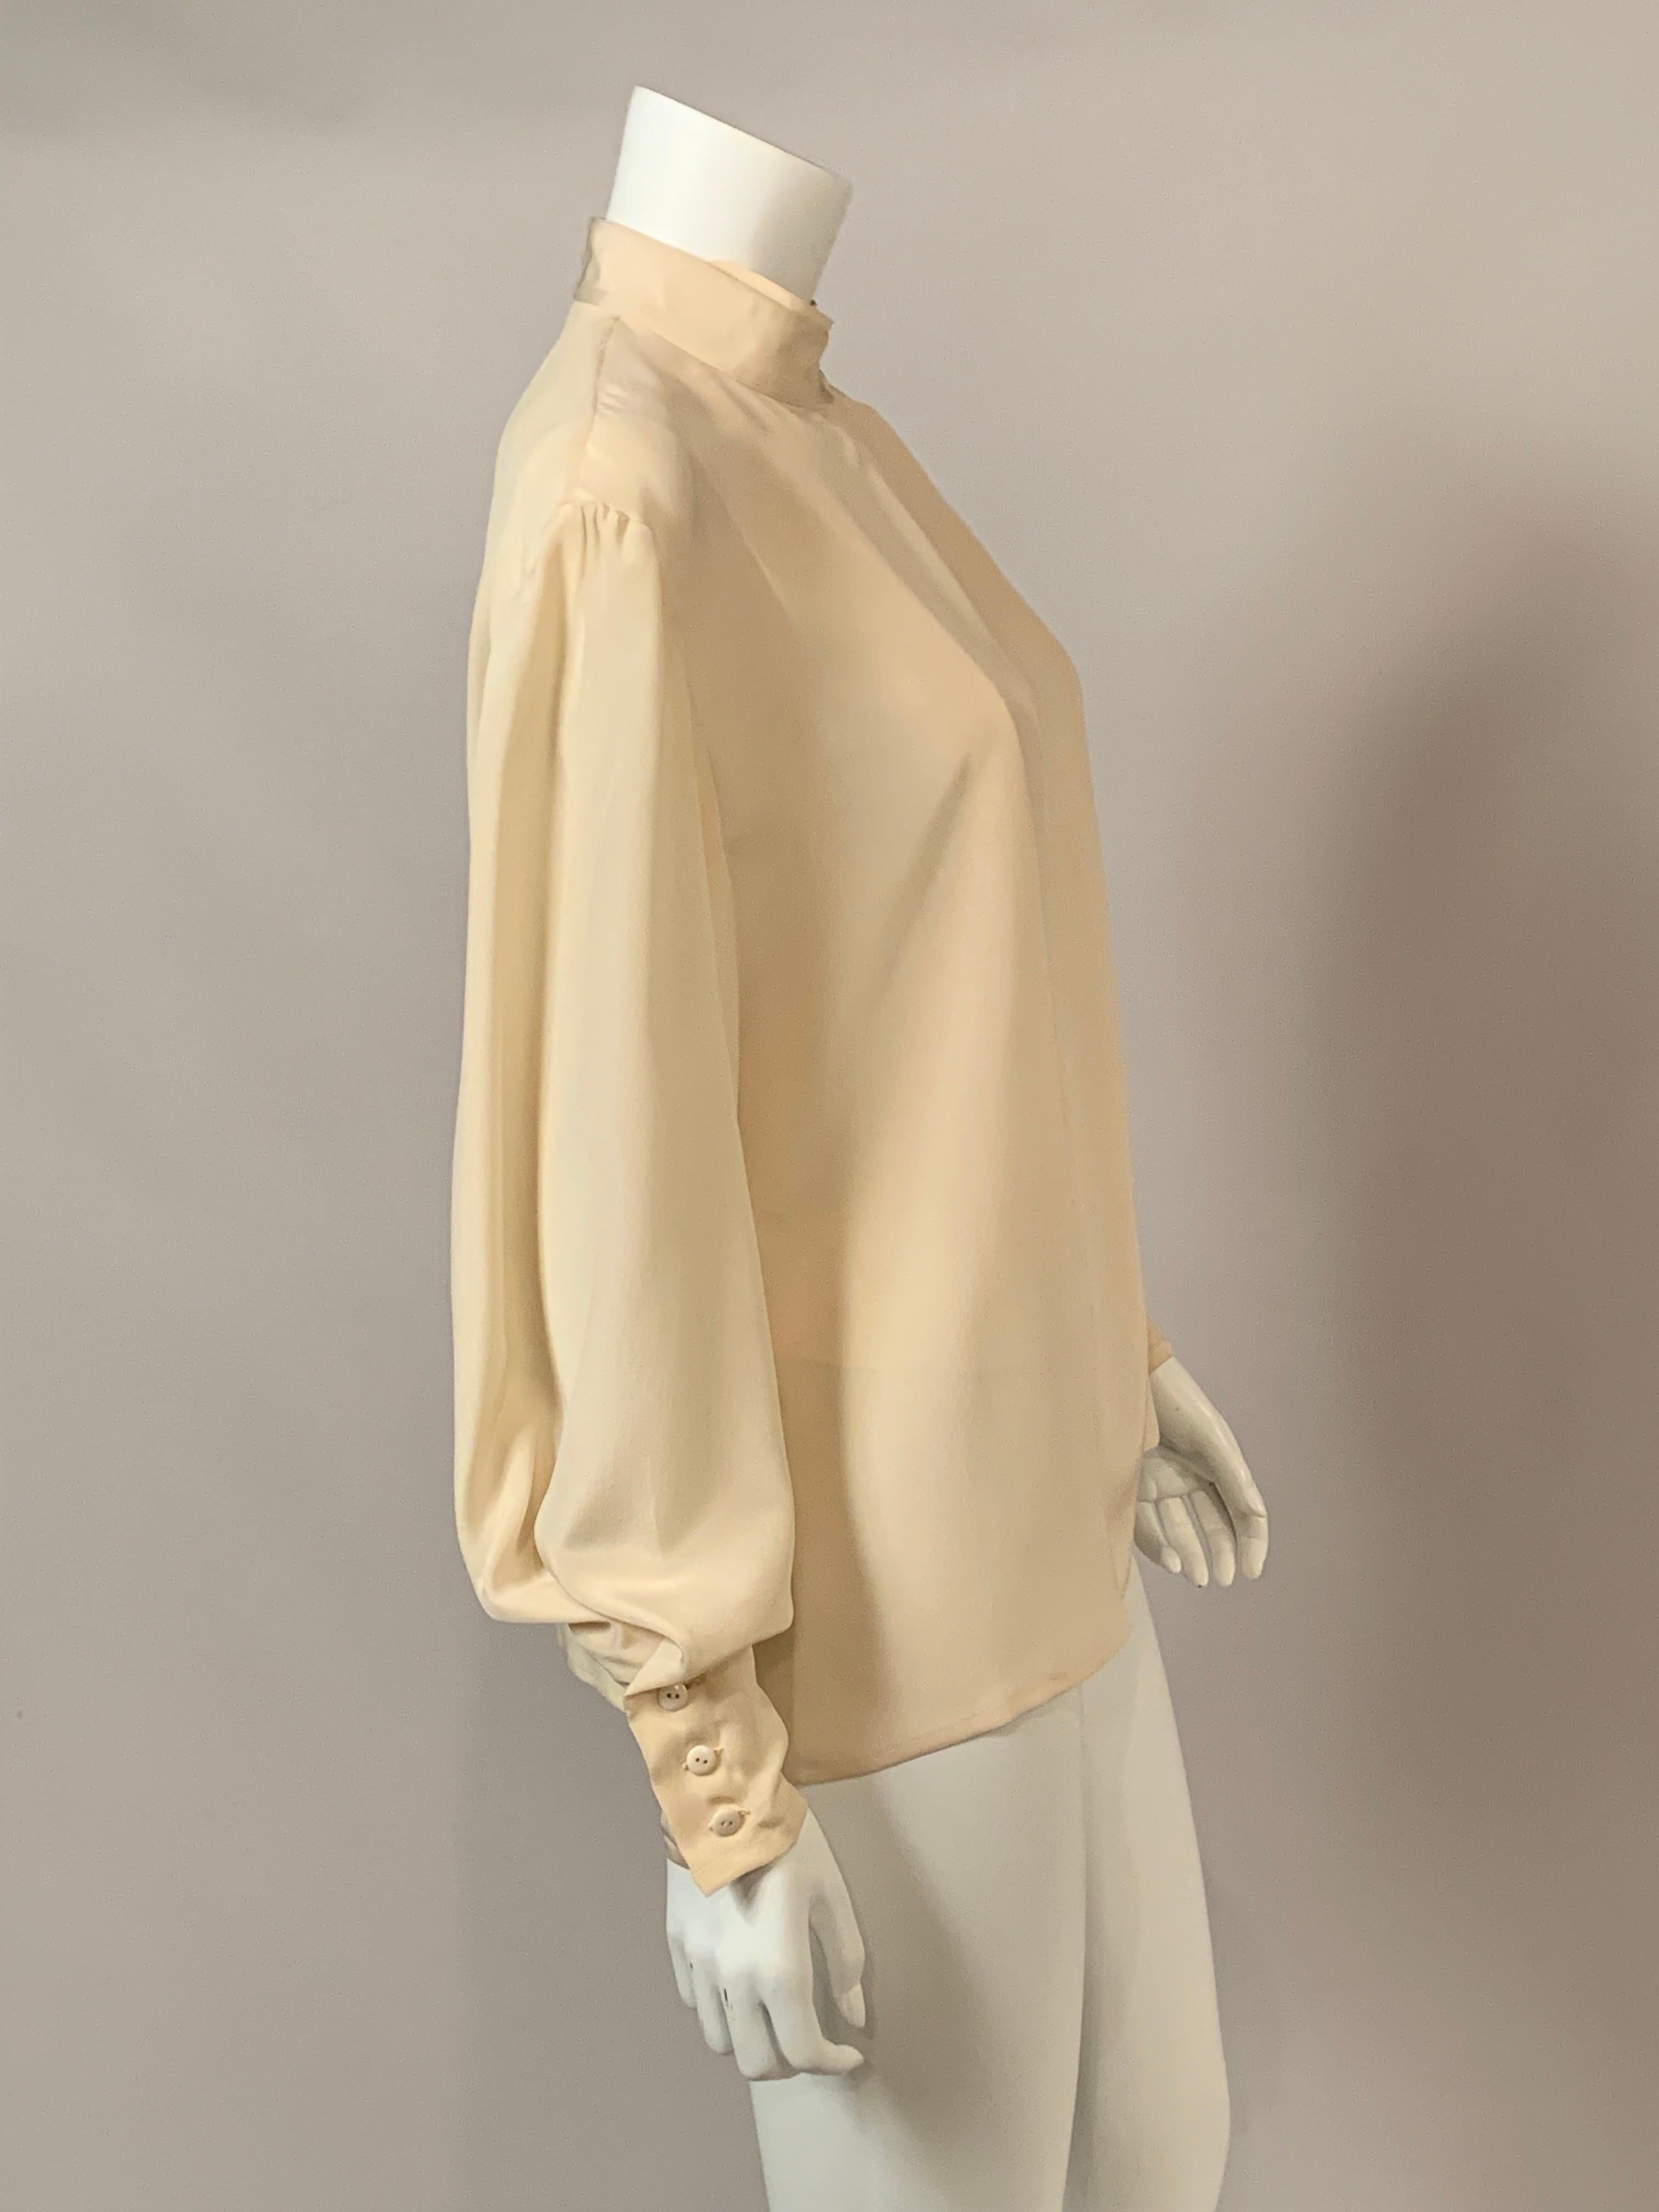 Ferragamo Ivory Silk One Button Blouse  Larger Size For Sale 3